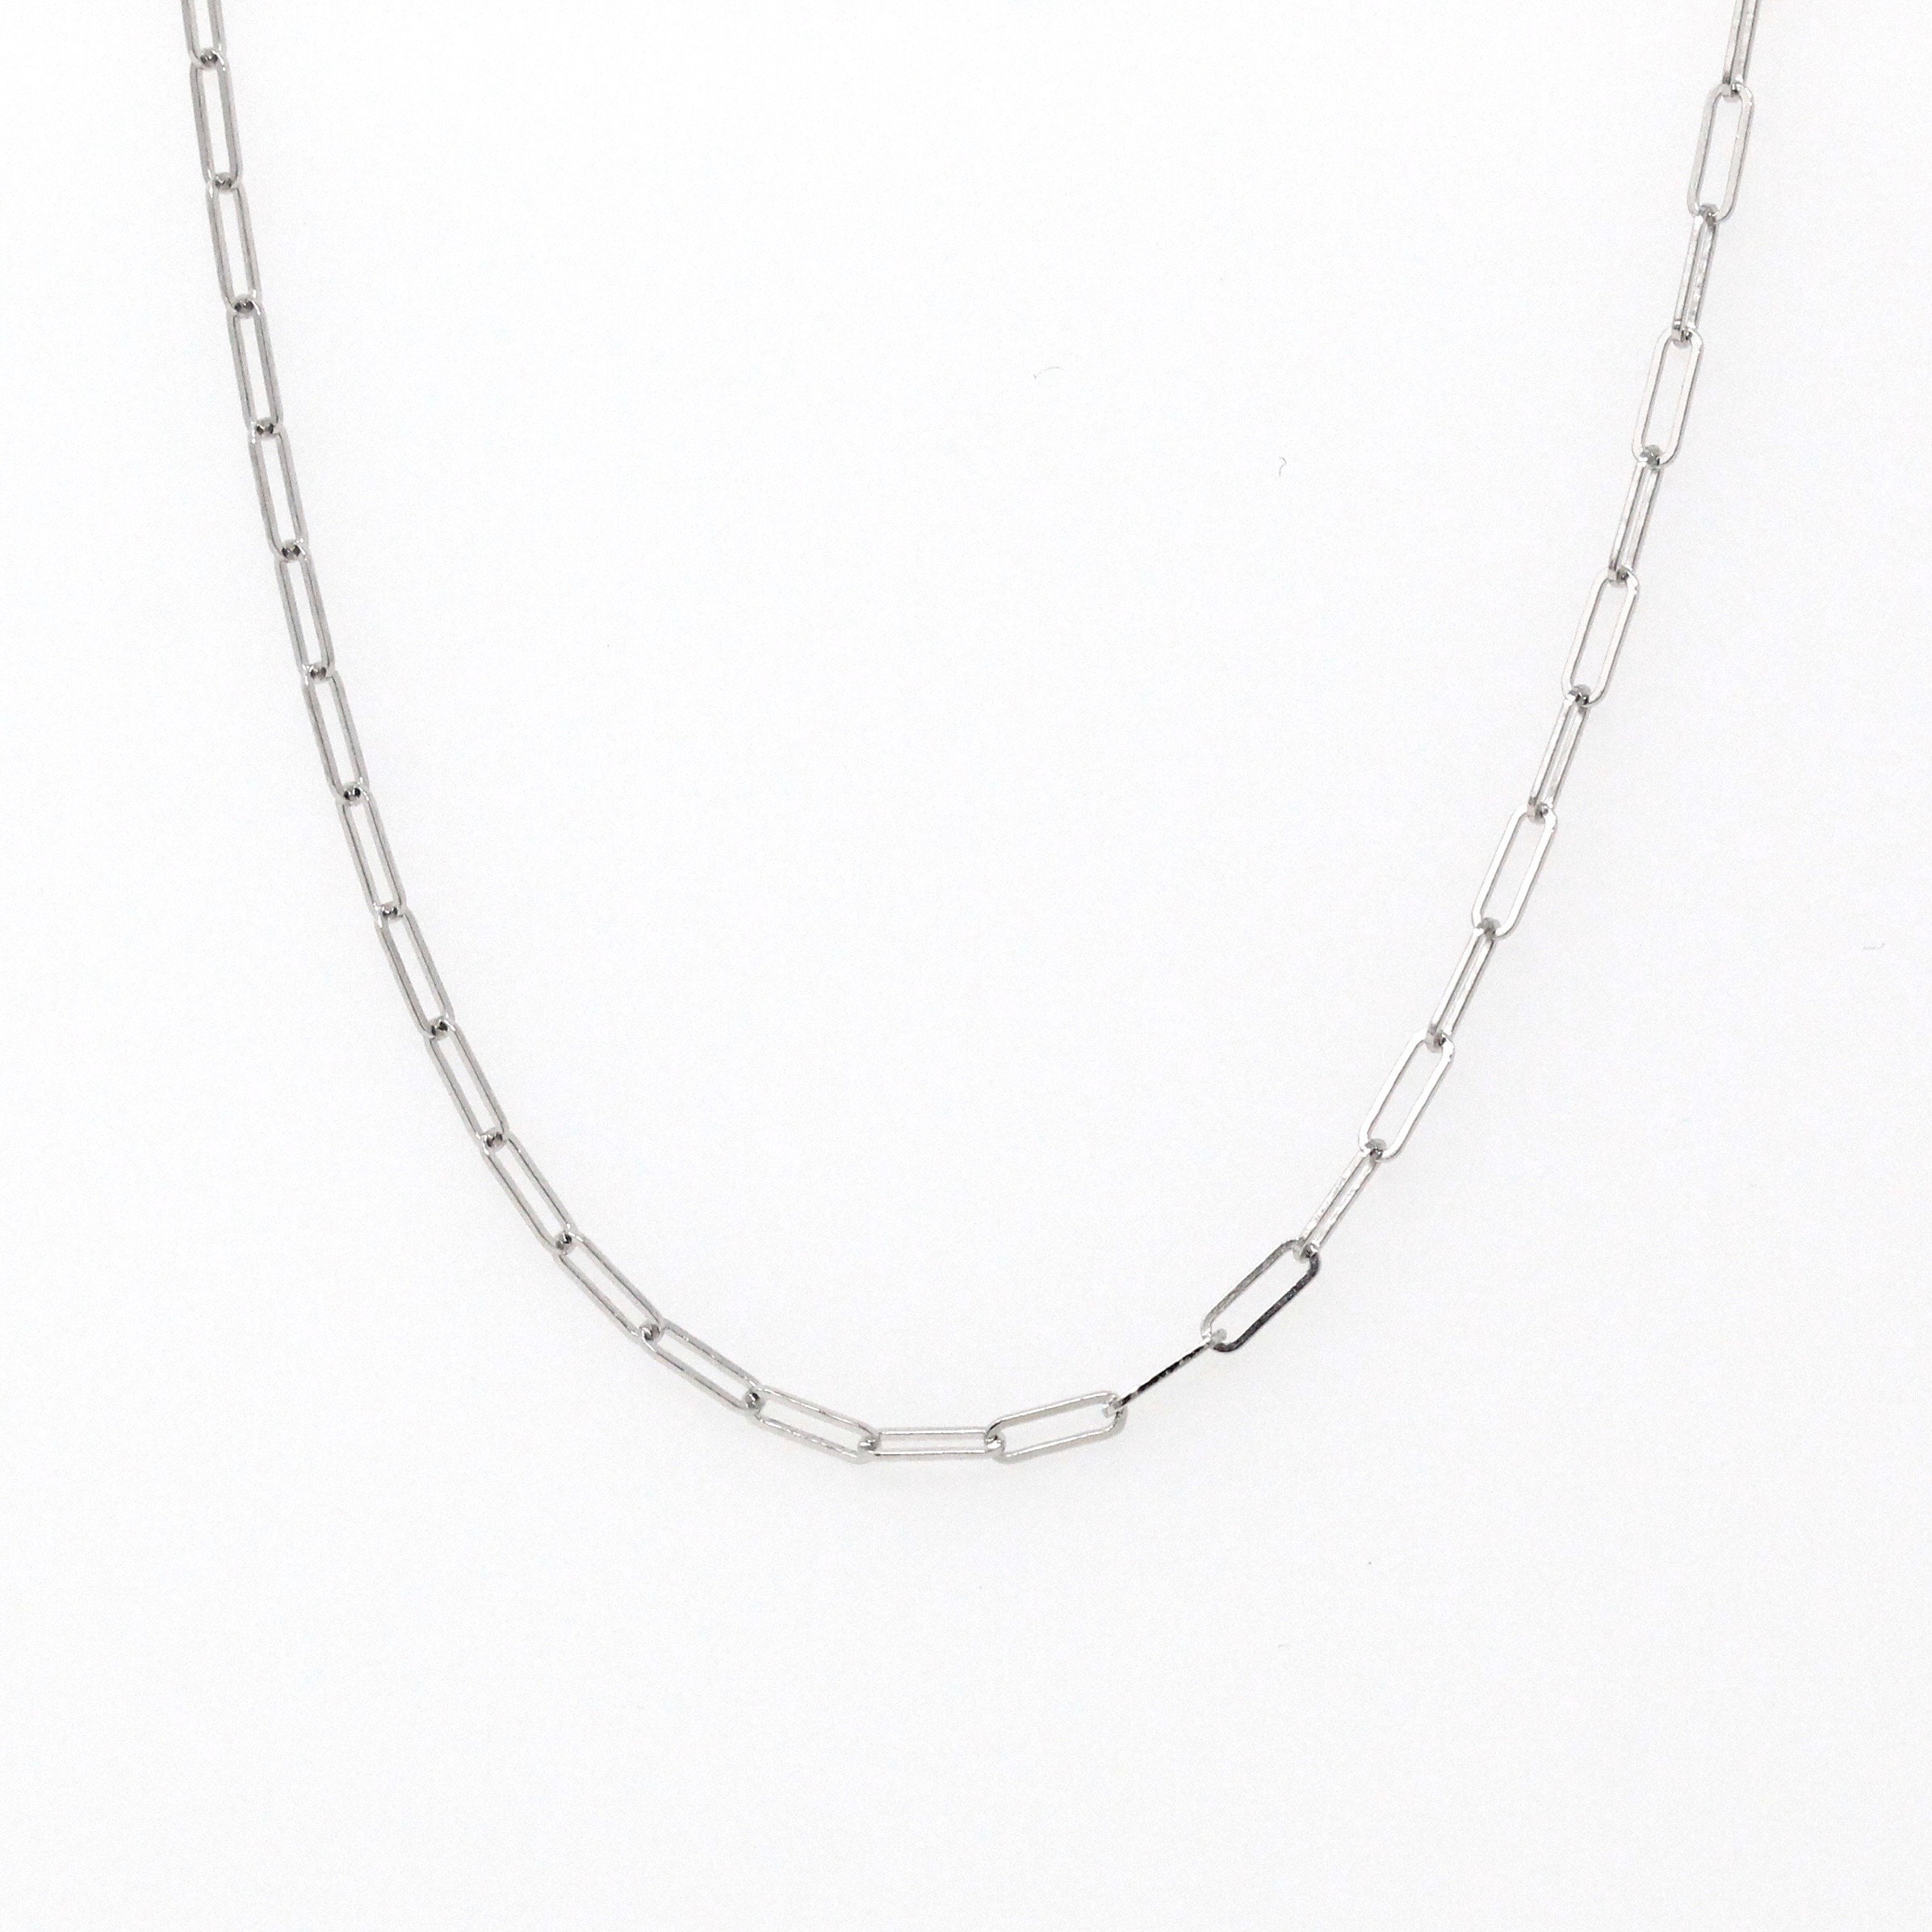 Large Cable Chain | Gold Chain | Pendant Chain | Necklace Chain 14K White Gold / 18in by Helen Ficalora